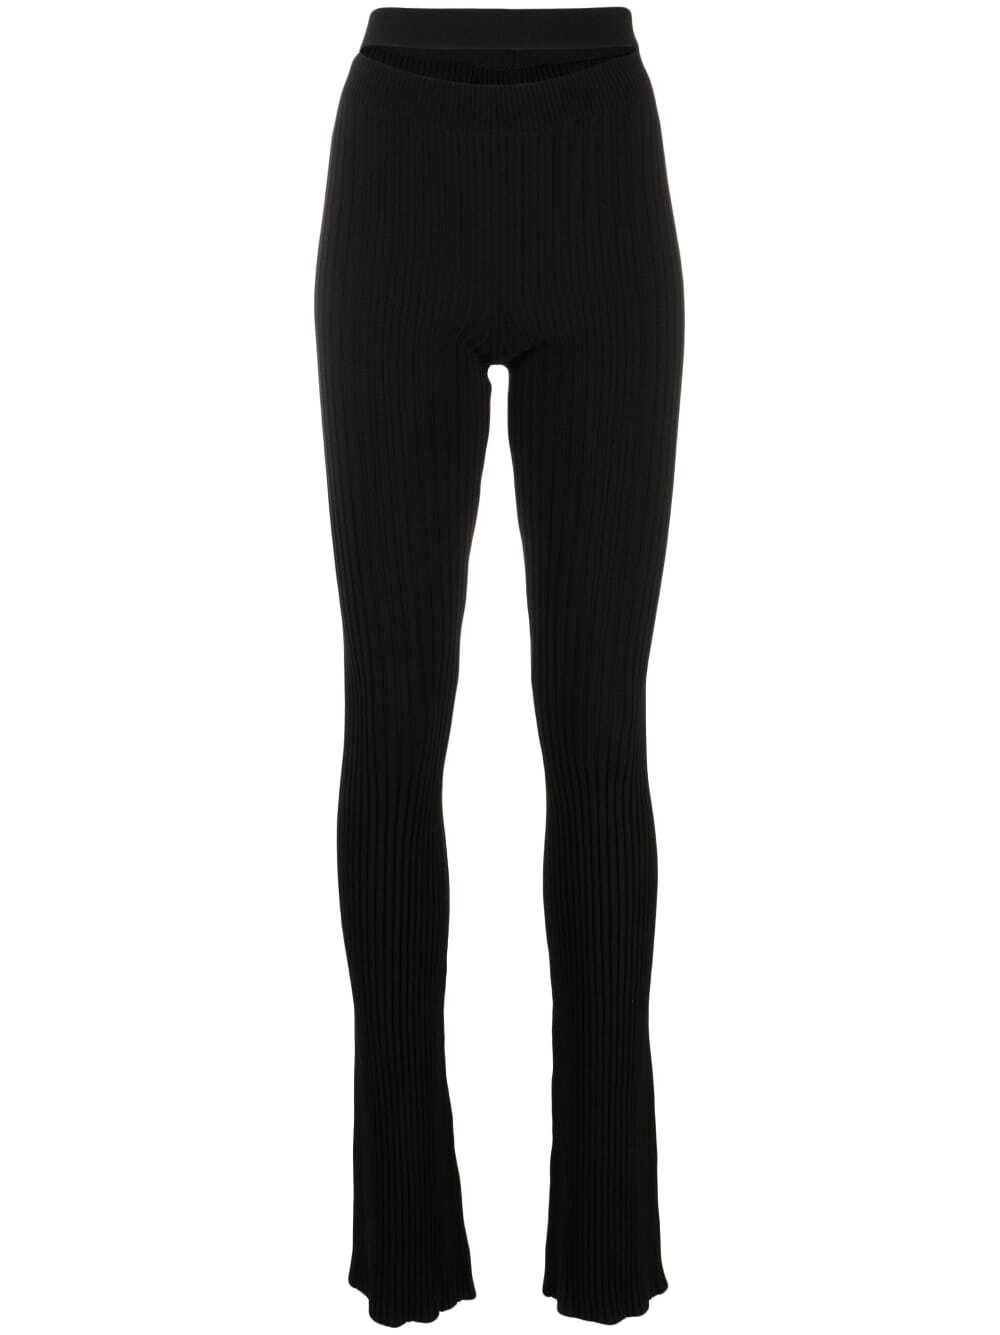 ANDREĀDAMO cut-out ribbed-knit flared trousers - Black